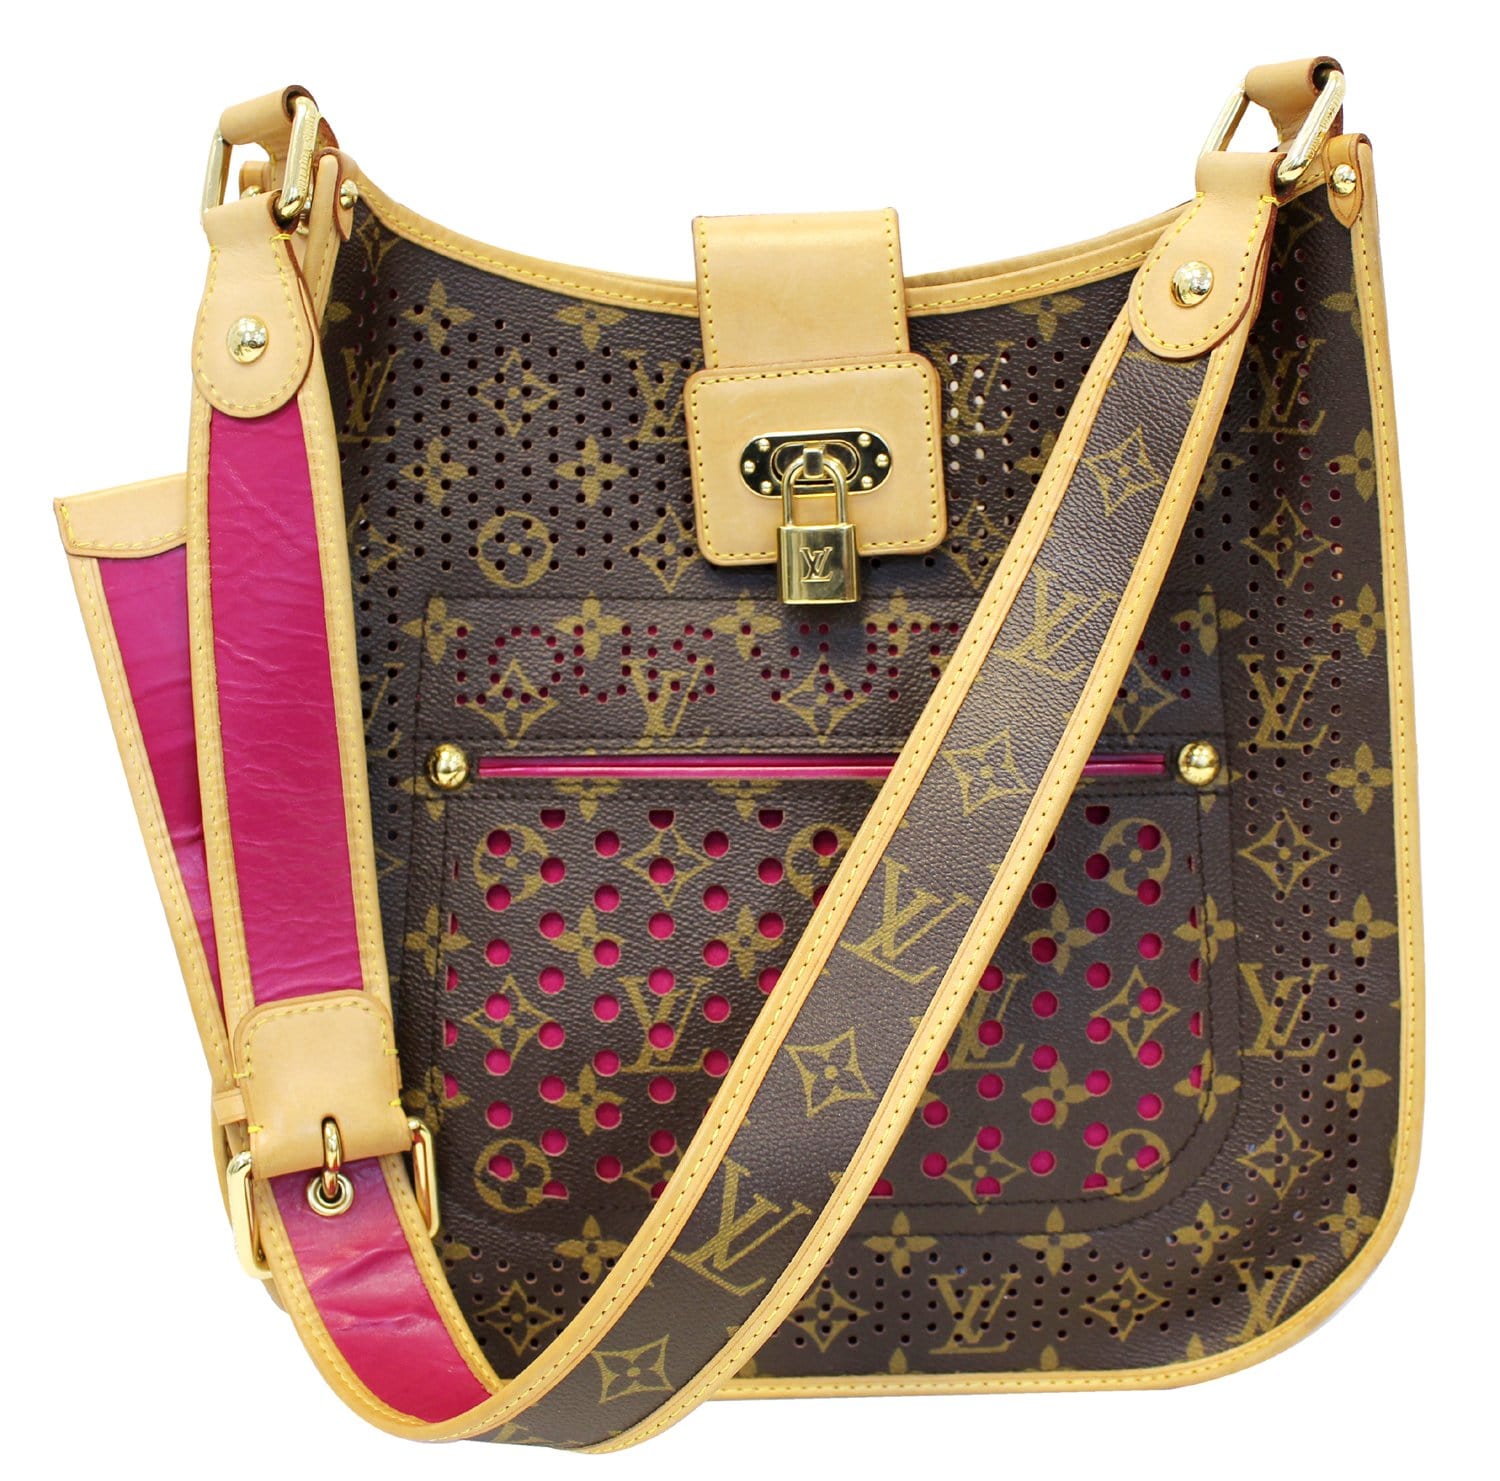 LOUIS VUITTON Monogram Perforated Musette Fuchsia Bag Limited Edition